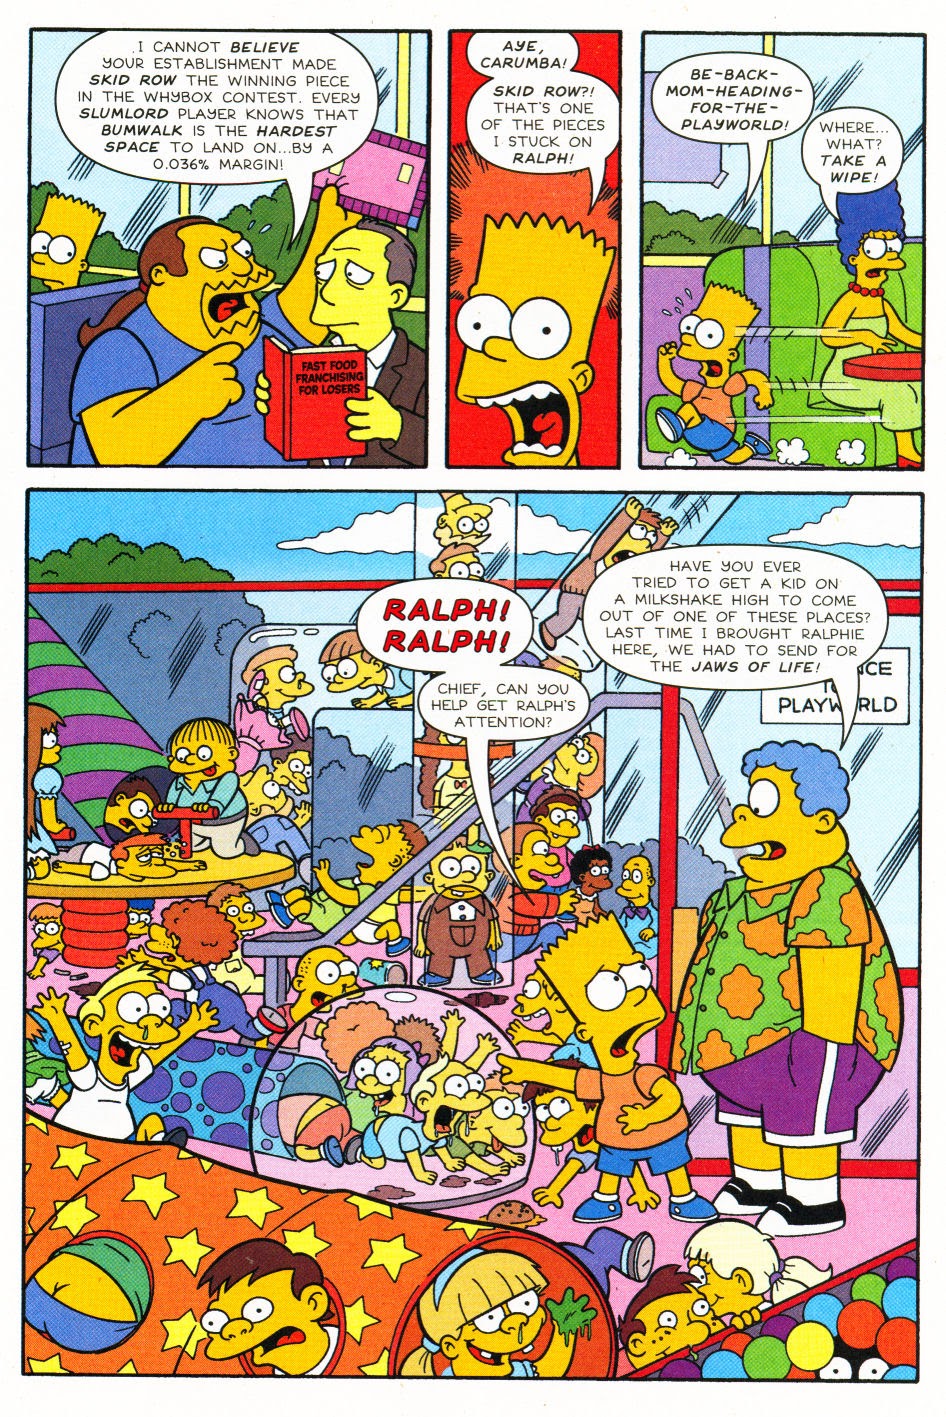 Read online Bart Simpson comic -  Issue #27 - 22